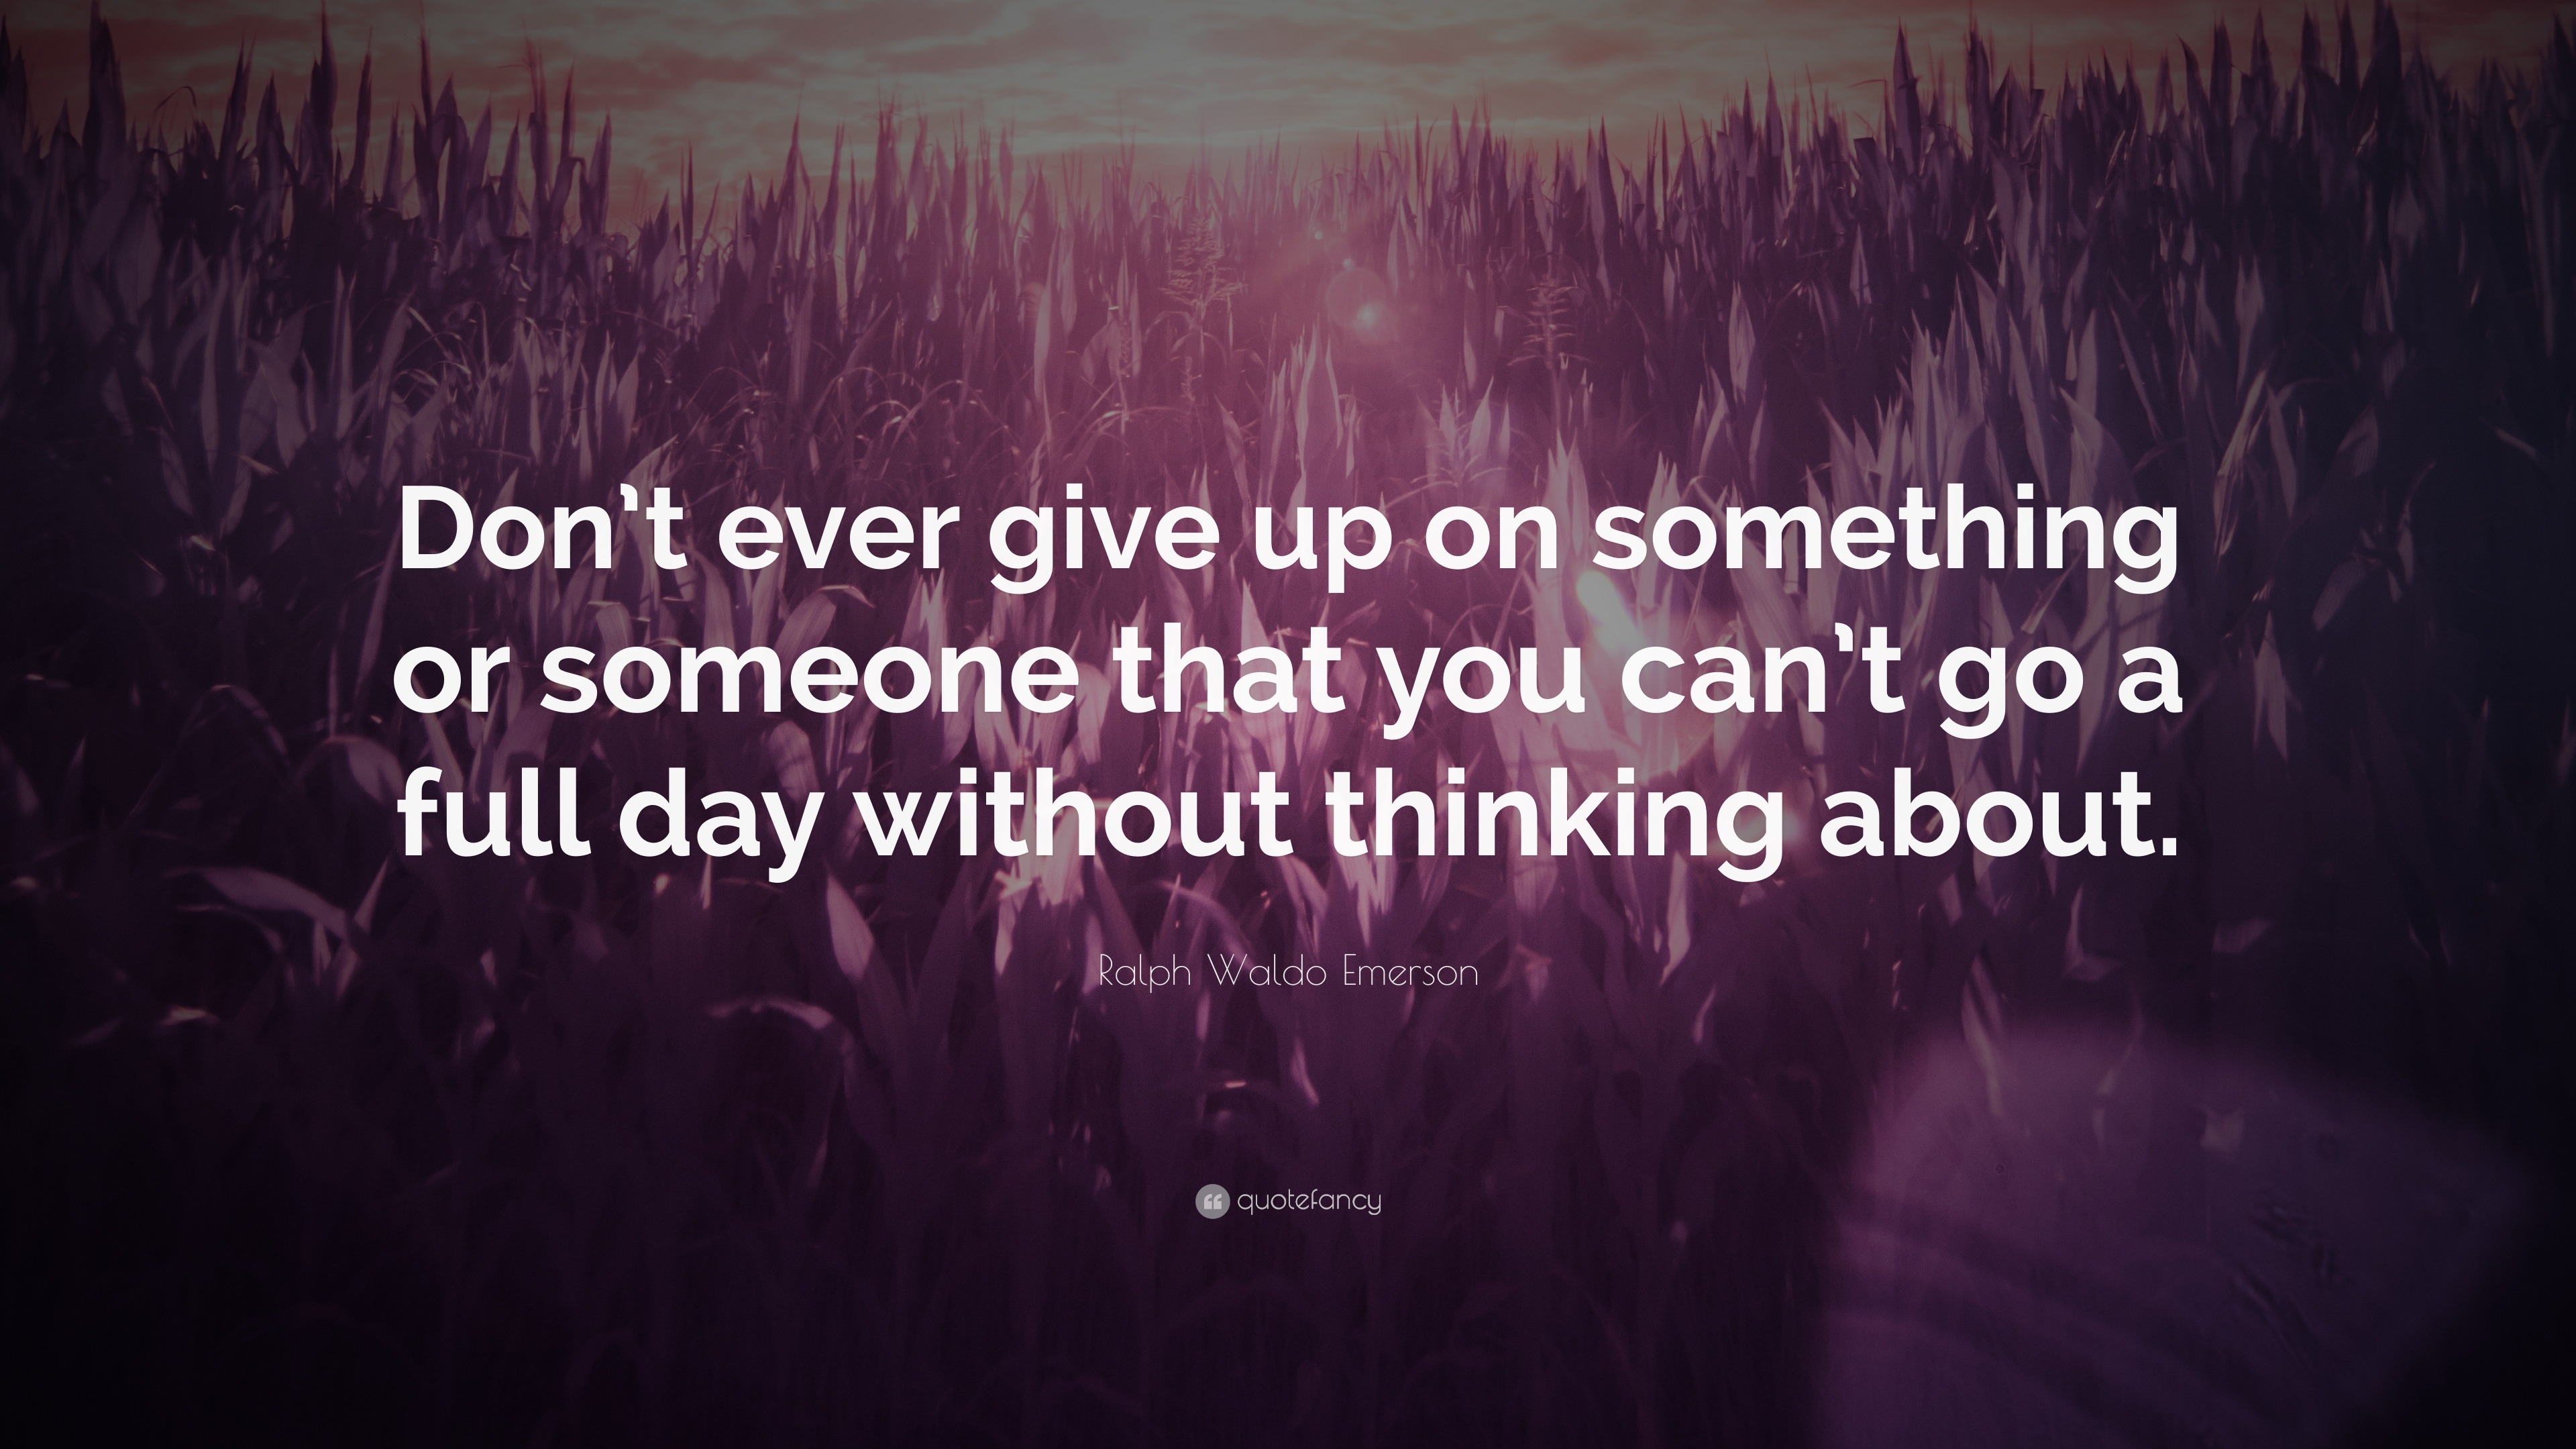 Ralph Waldo Emerson Quote “Don t ever give up on something or someone